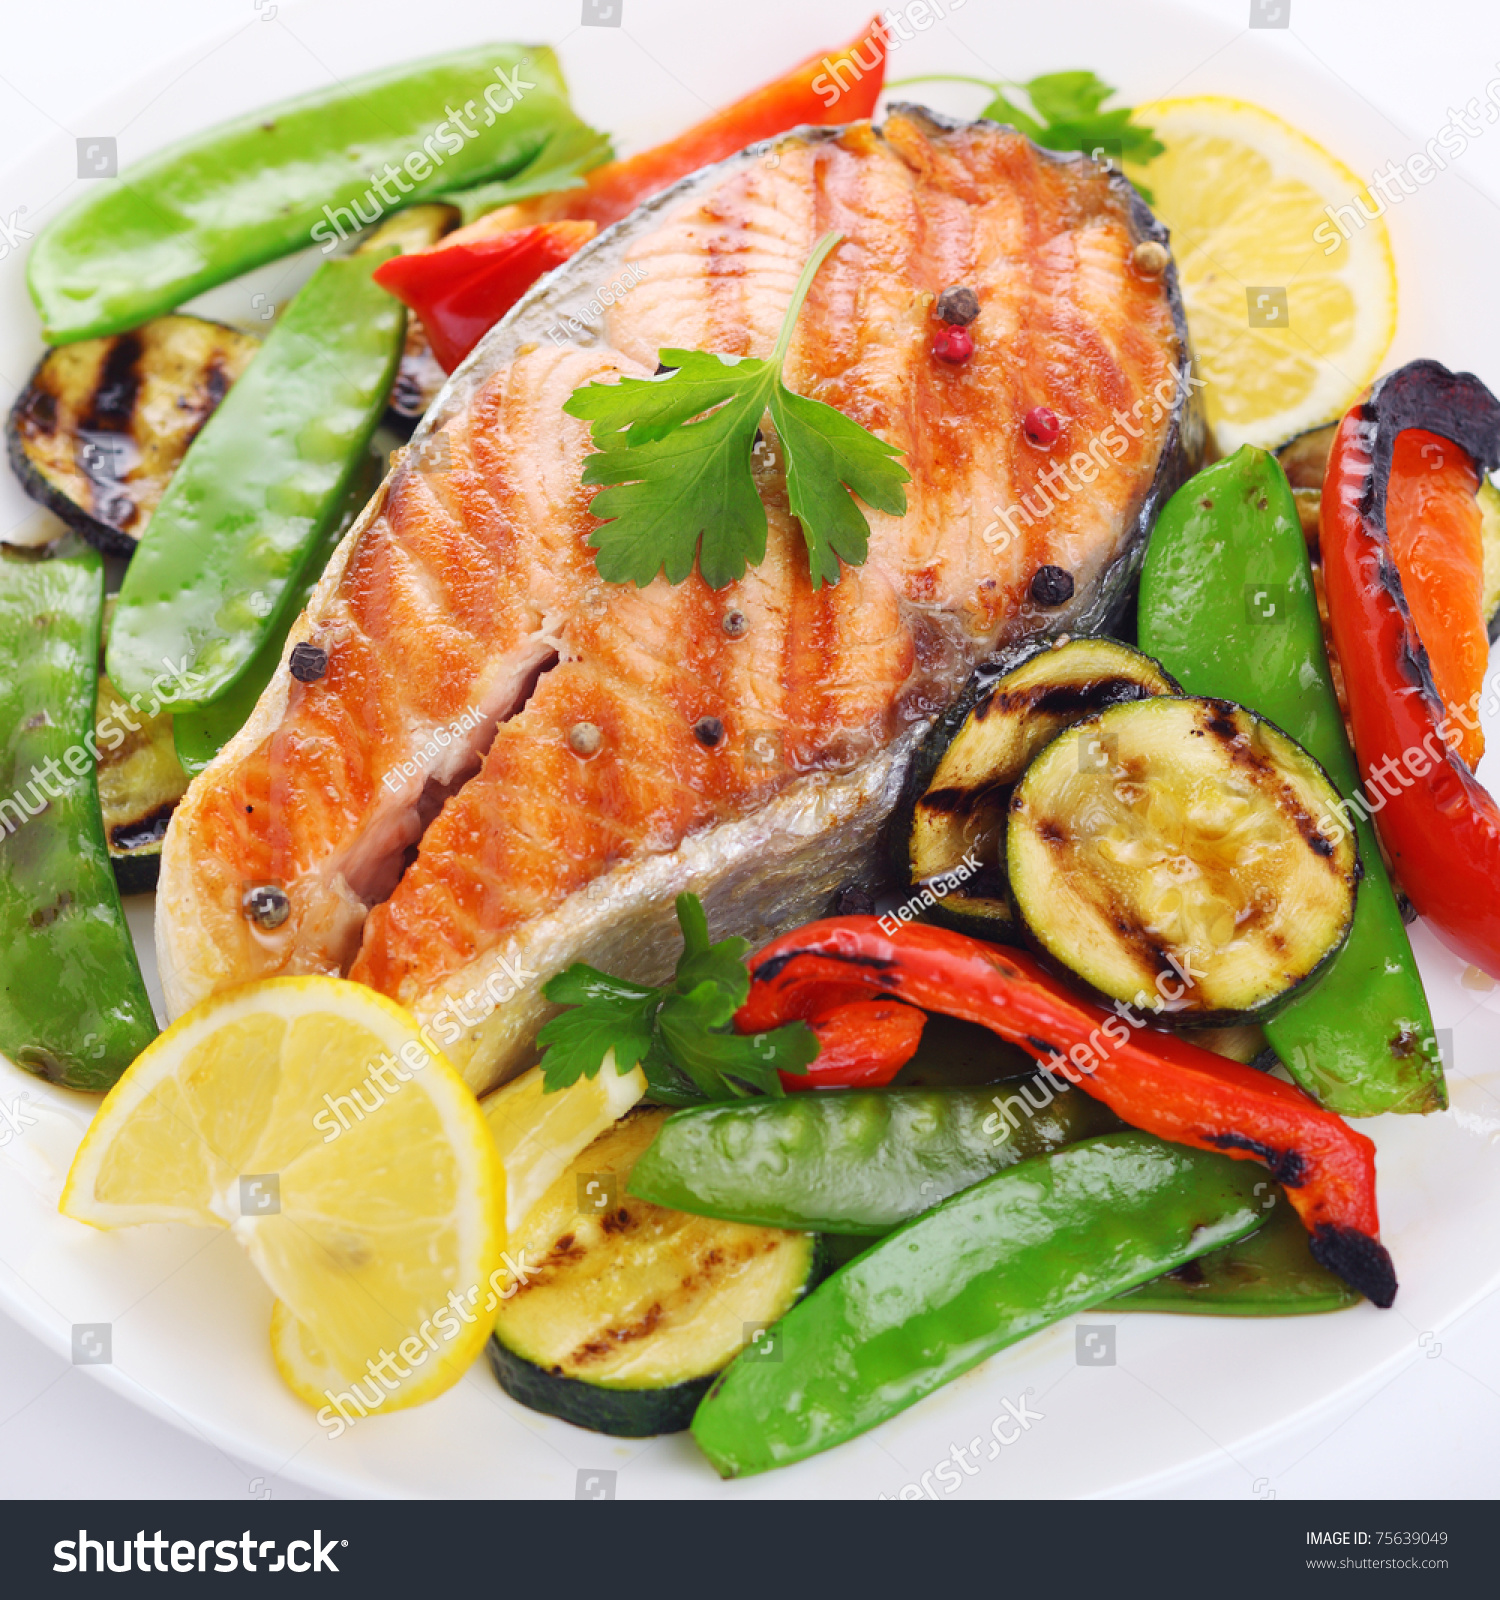 Grilled Salmon Vegetables On White Plate Stock Photo 75639049 ...